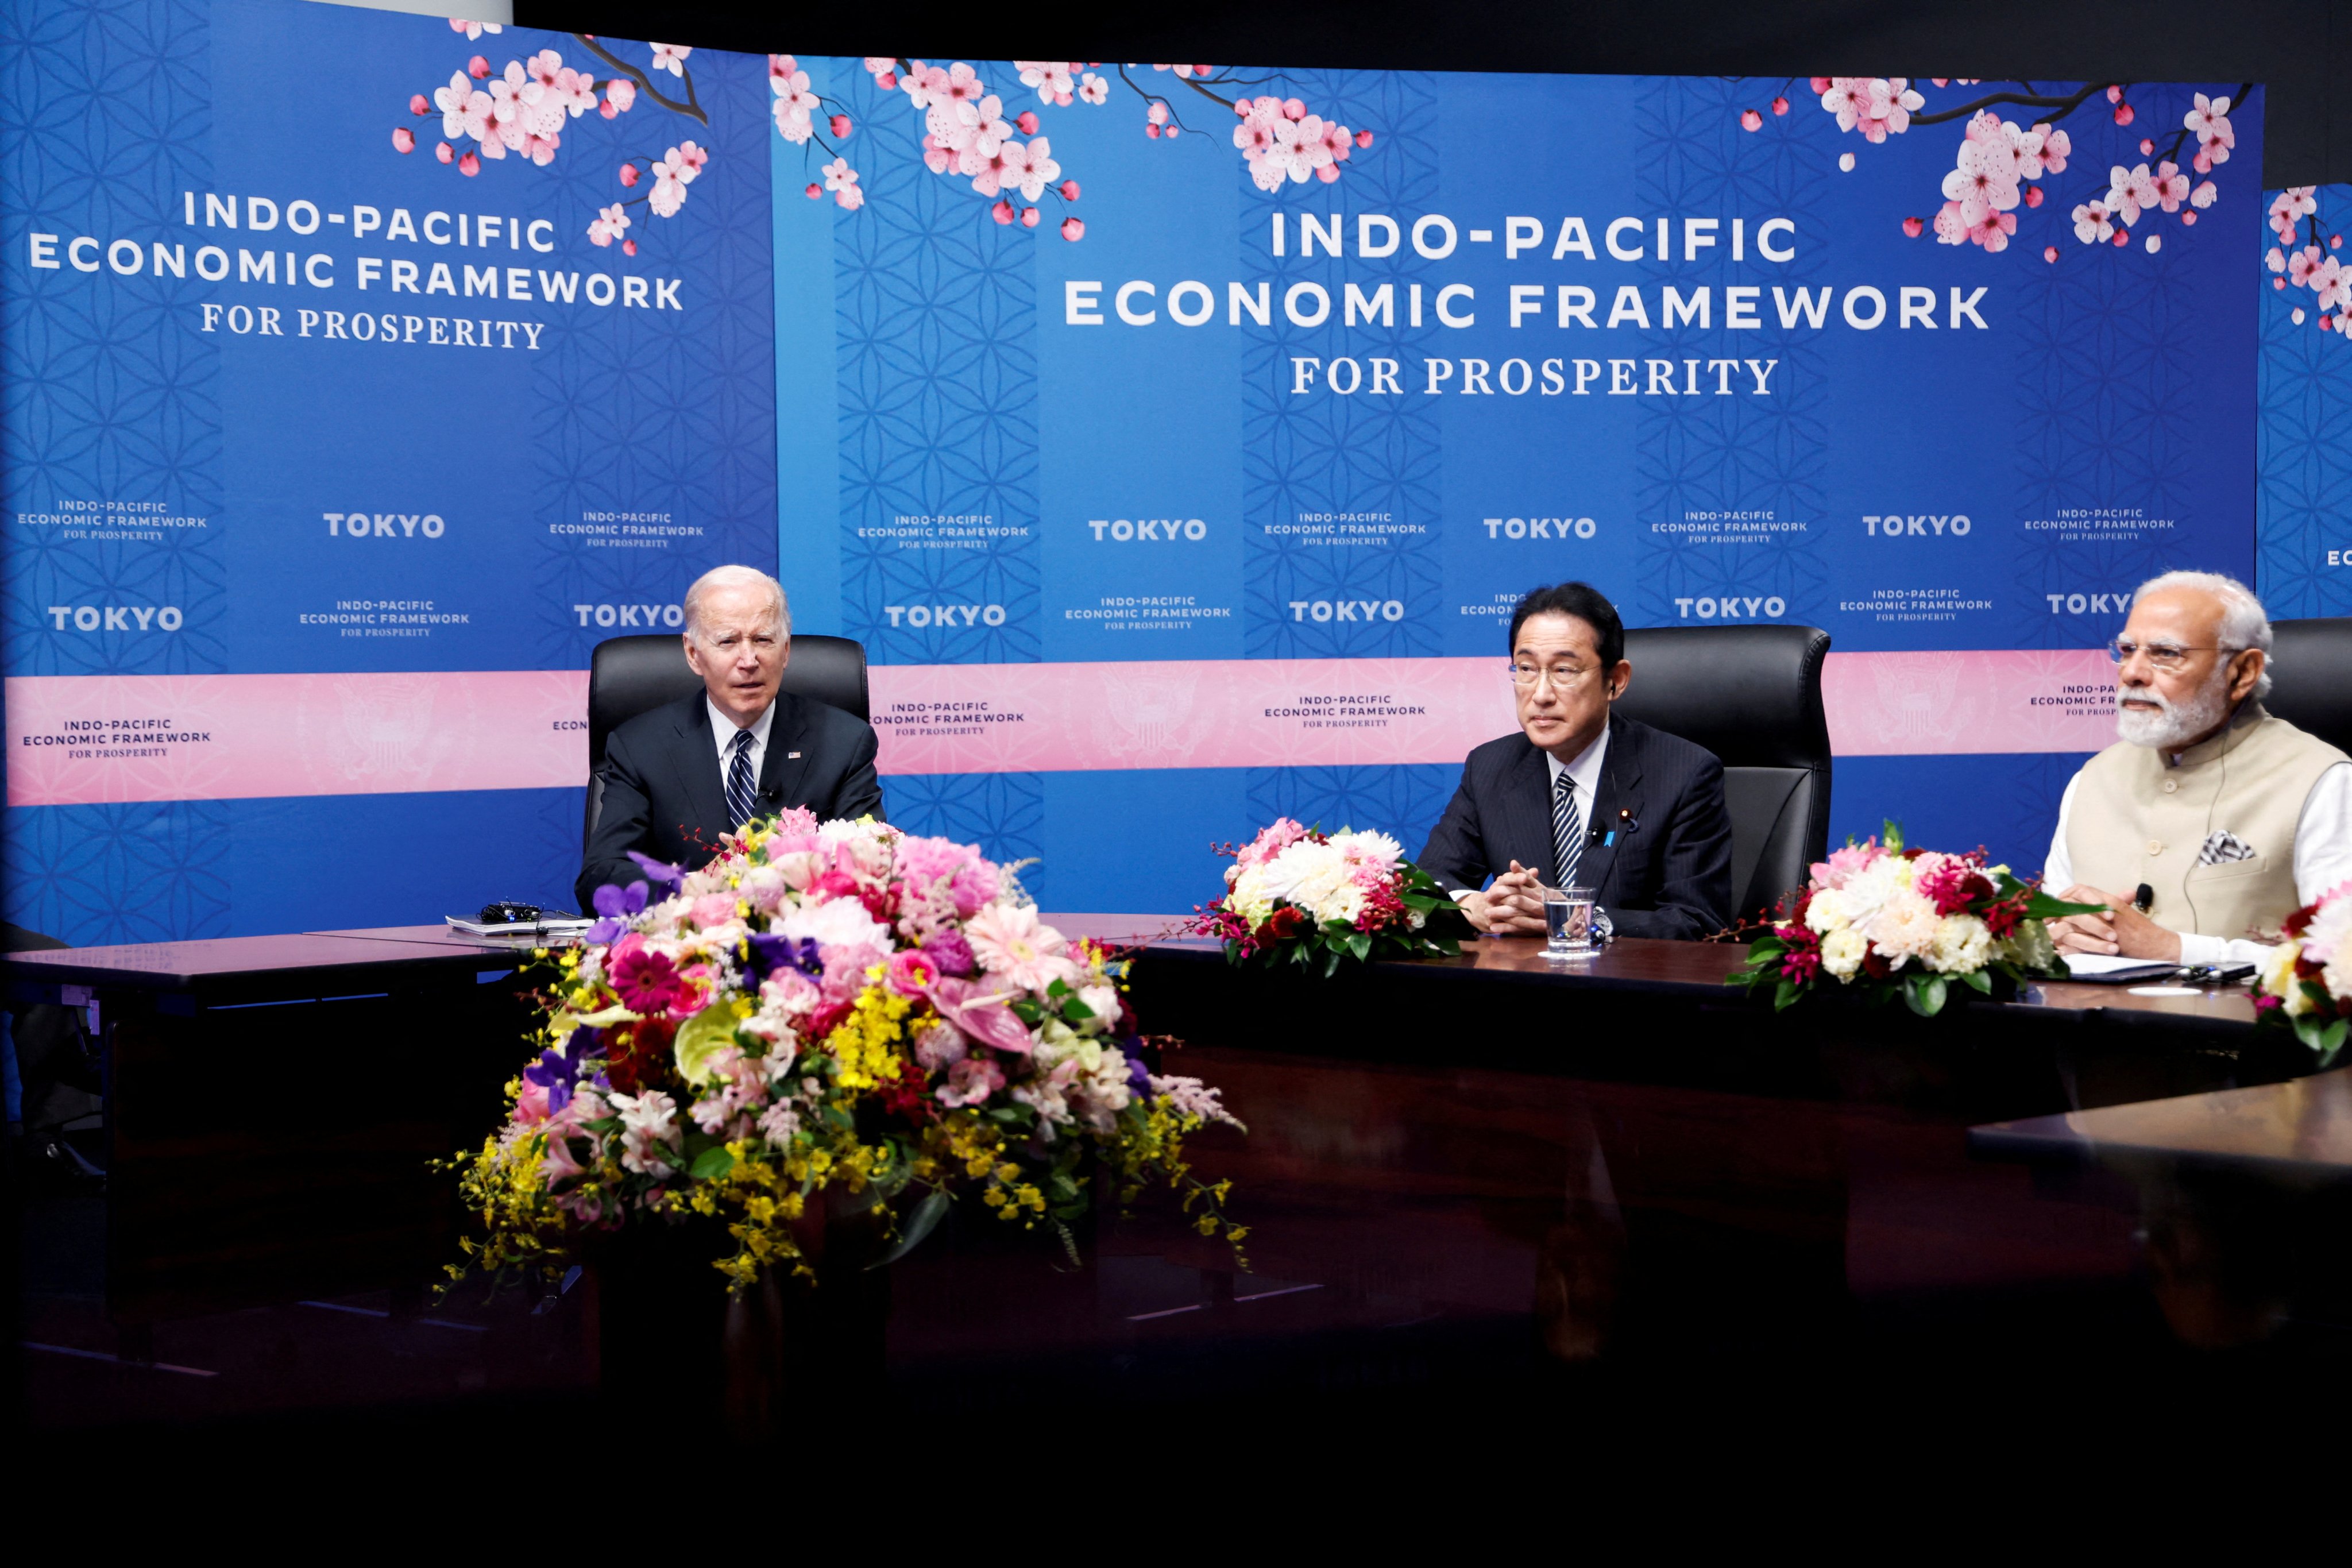 US President Joe Biden delivers remarks along with India’s Prime Minister Narendra Modi and Japan’s Prime Minister Fumio Kishida during the Indo-Pacific Economic Framework for Prosperity (IPEF) launch event at Izumi Garden Gallery in Tokyo, in May 2022. Photo: Reuters